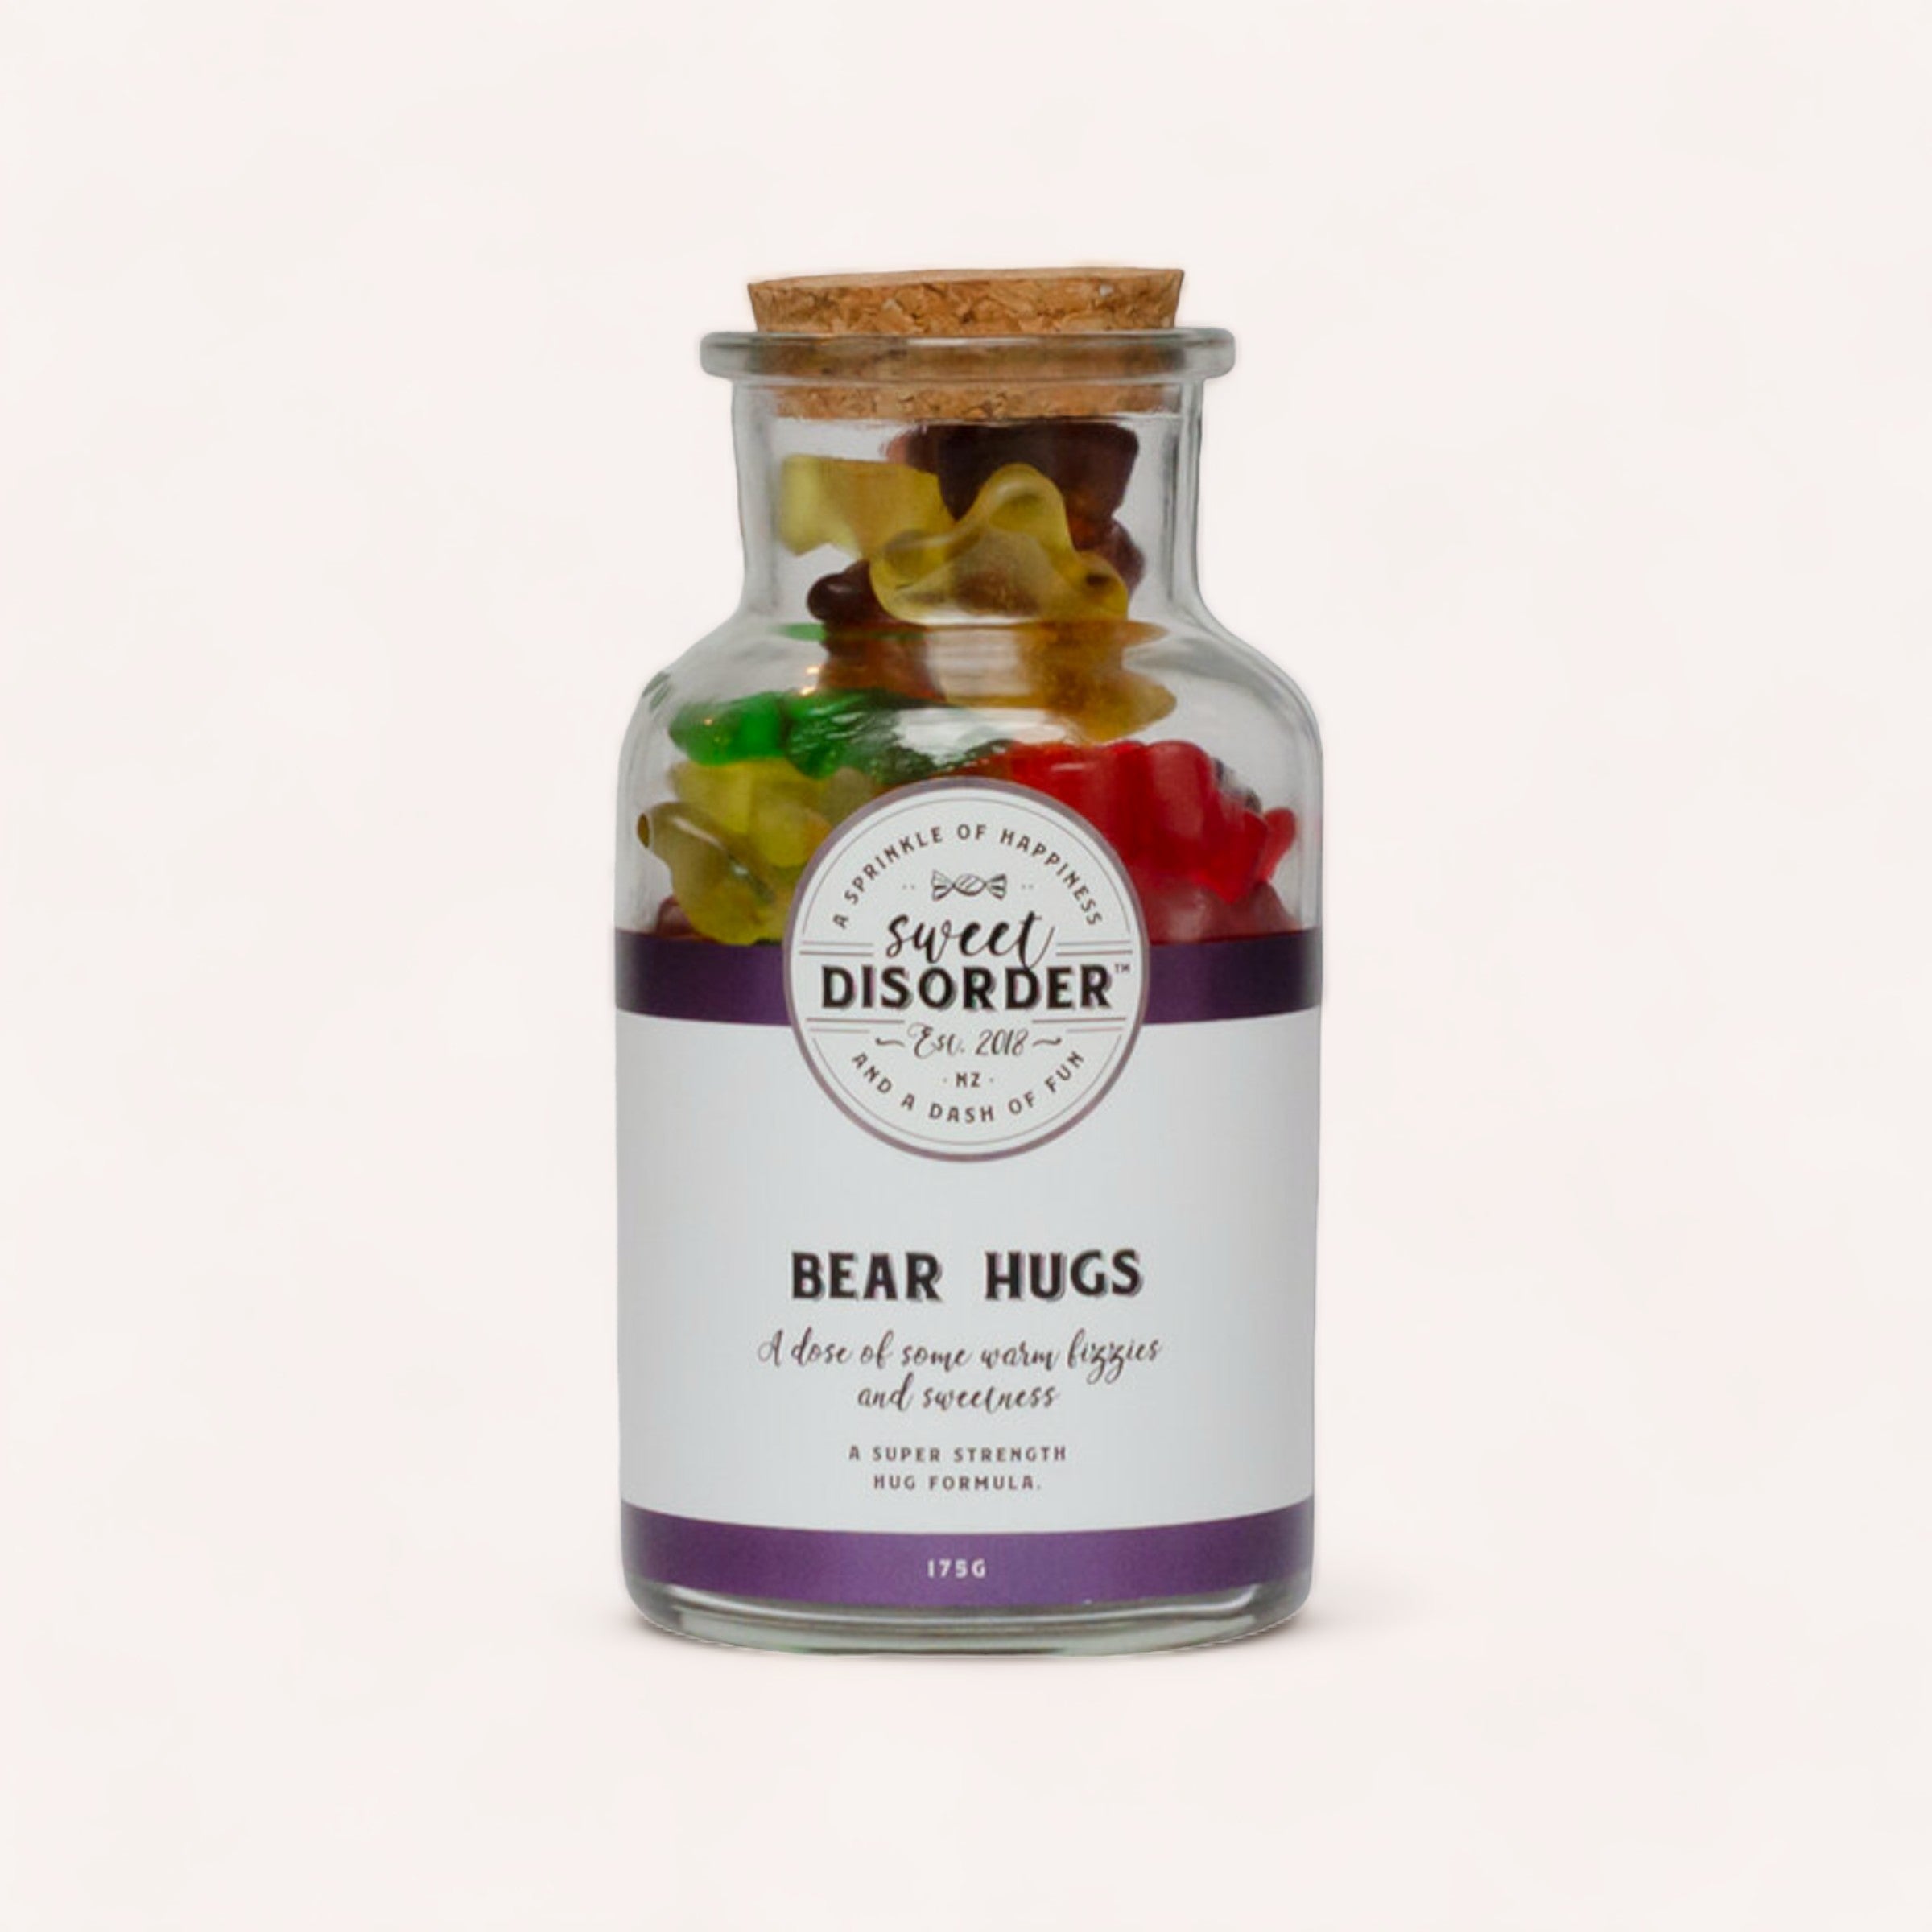 A glass jar filled with Bear Hugs Lollies by Sweet Disorder, sealed with a cork. It has a purple label that reads "super strength hugs" and encourages a dose of hugs for sweetness and strength.